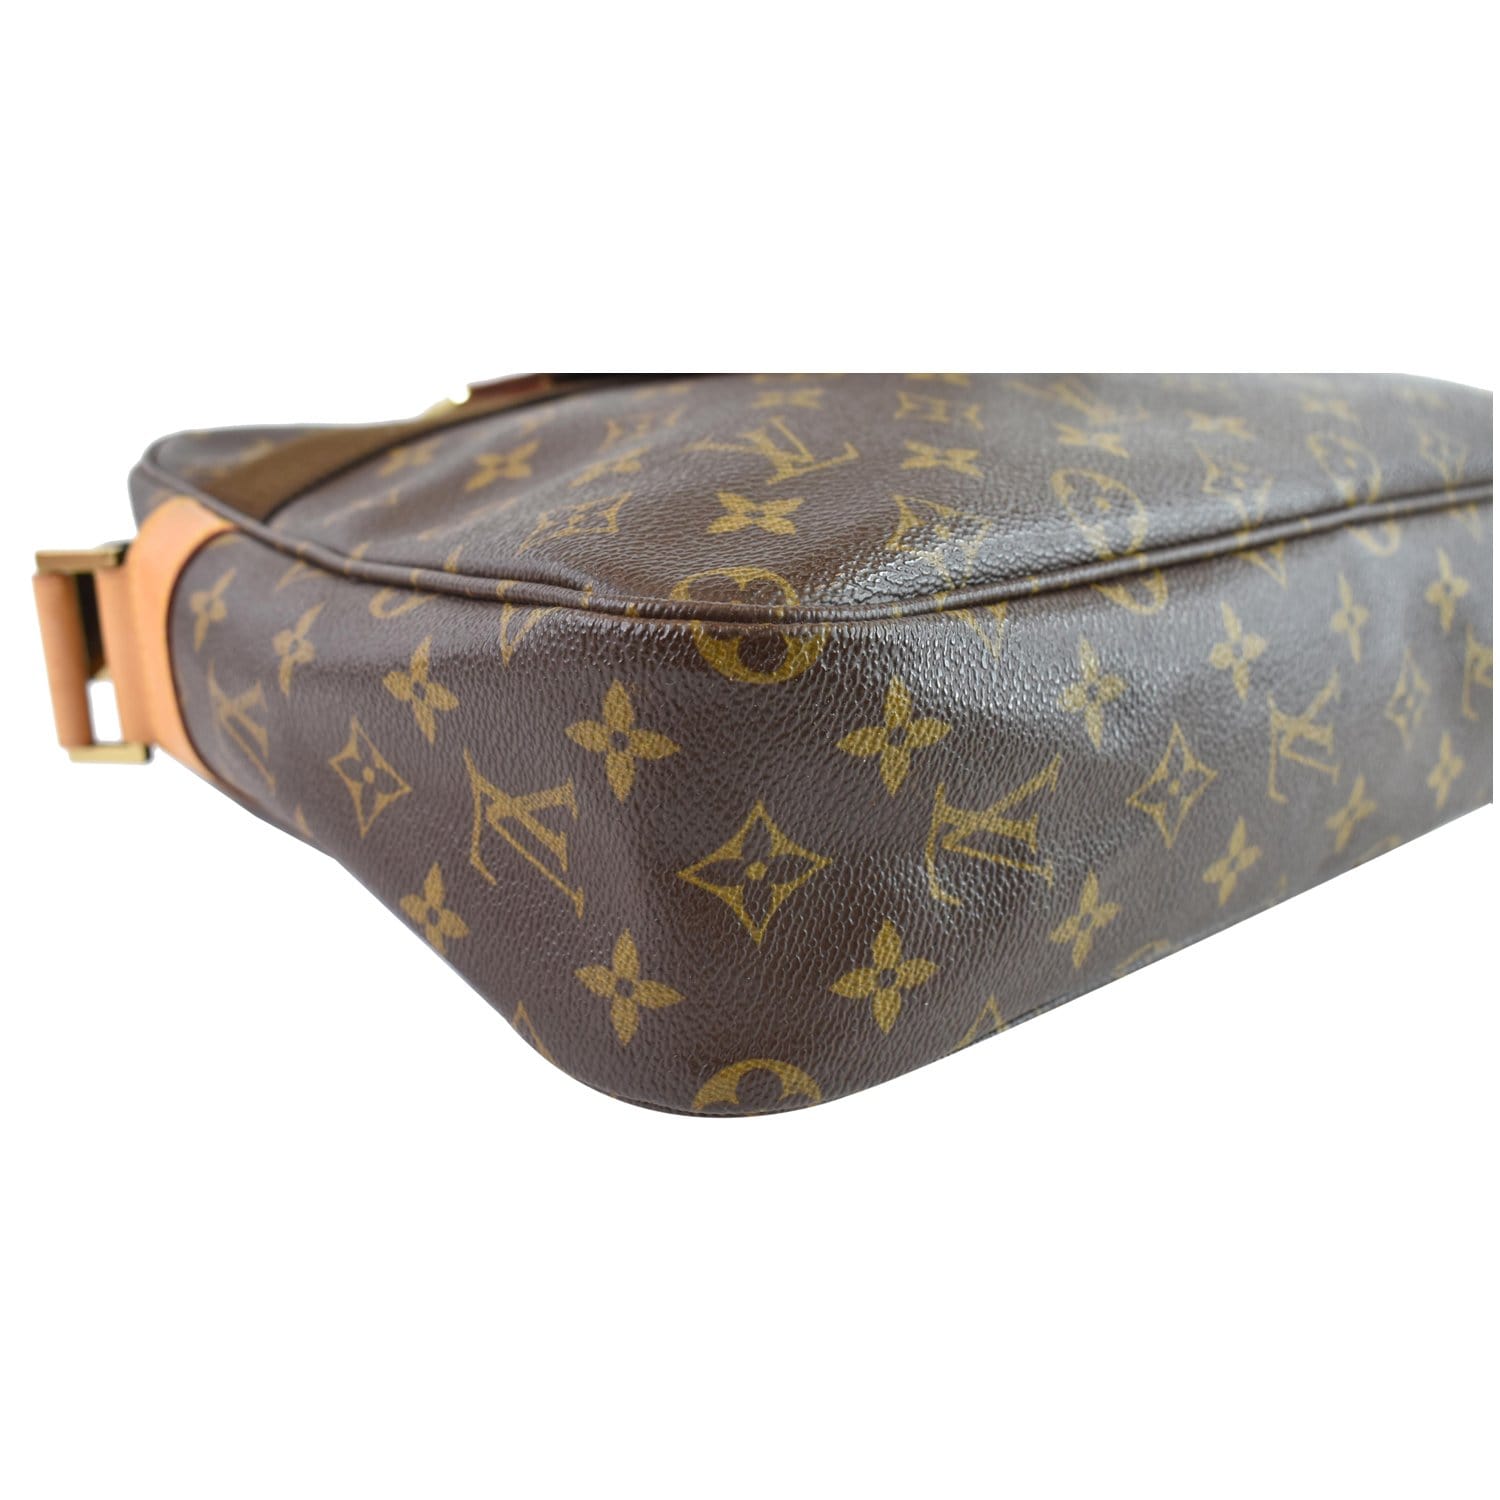 Louis Vuitton 'Monceau' Messenger bag reference guide - Spotted